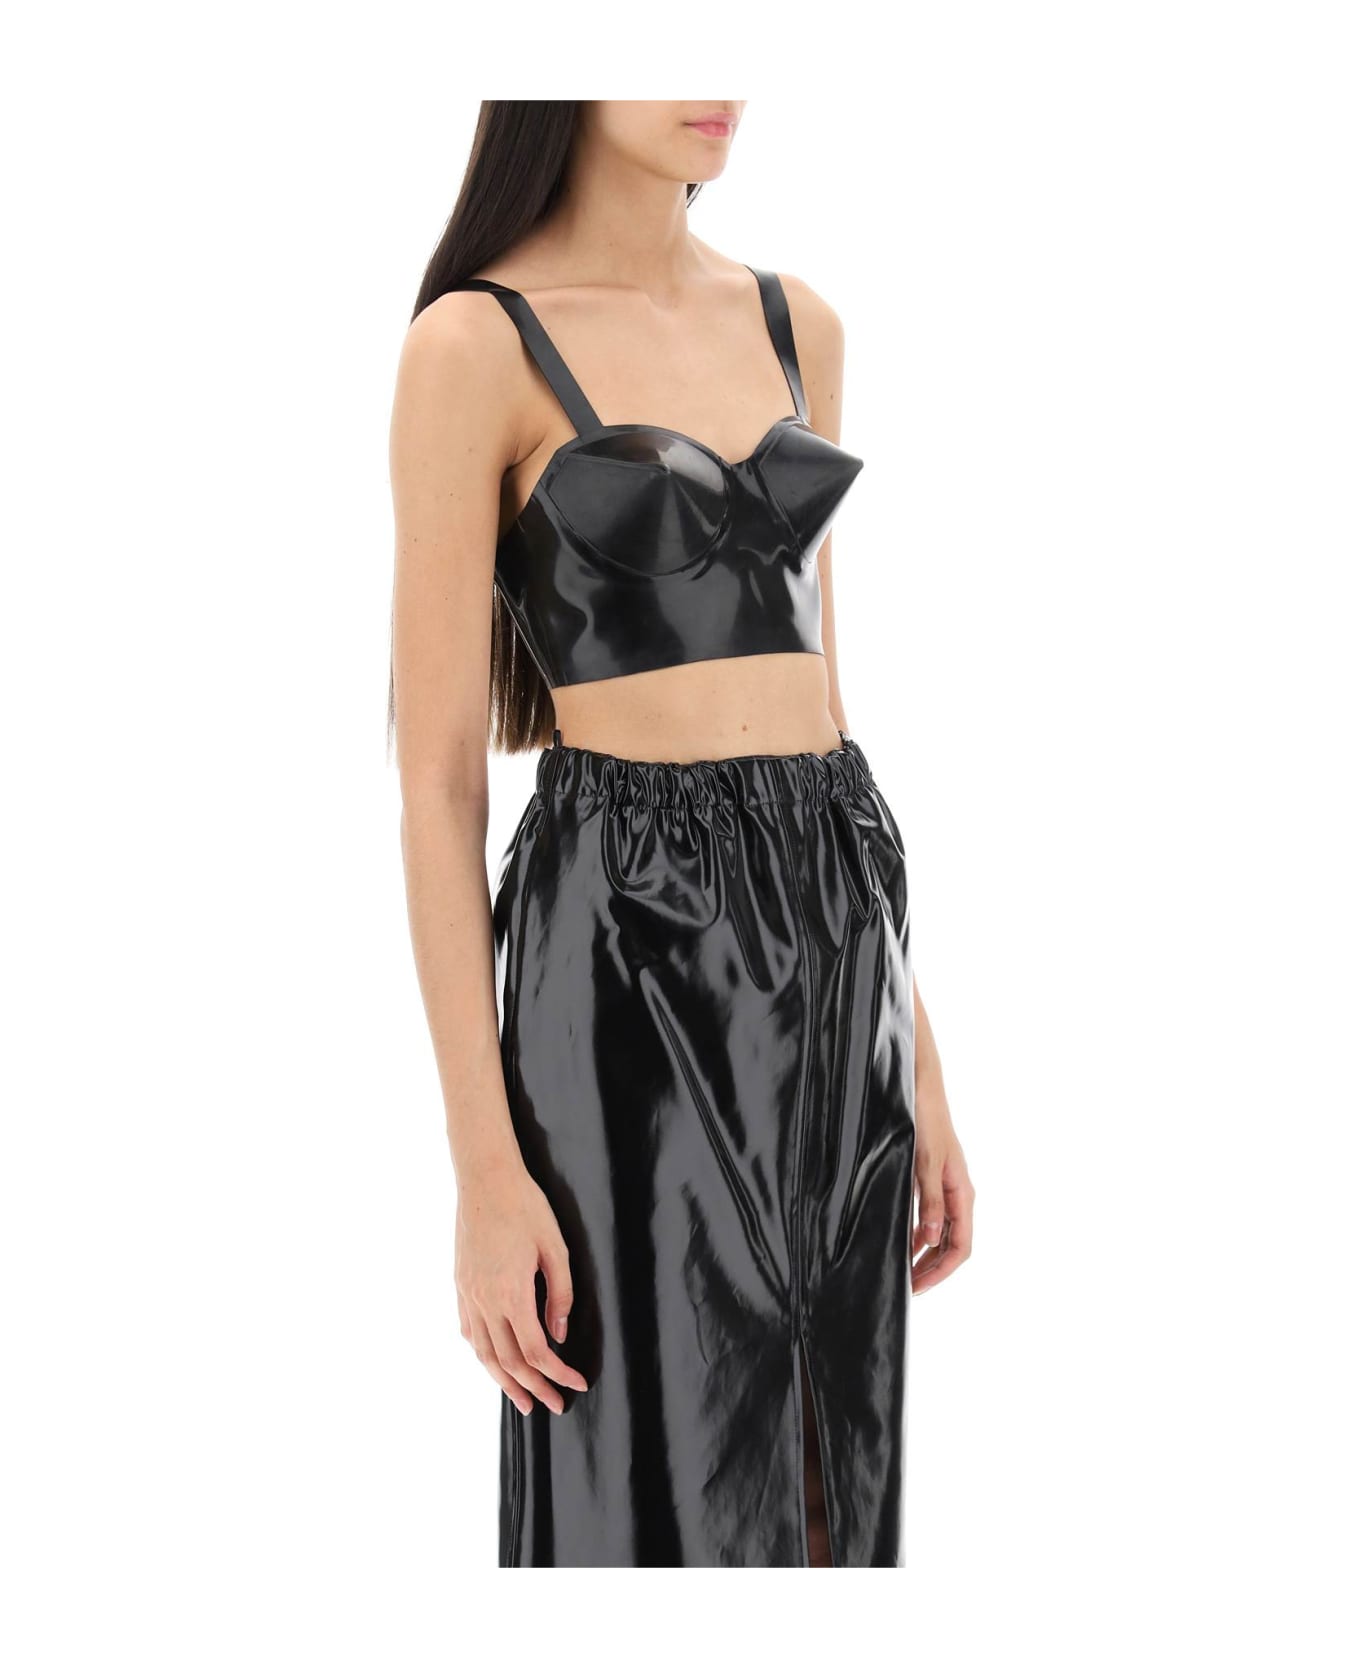 Maison Margiela Latex Top With Bullet Cups - BLACK (Black) ランジェリー＆パジャマ